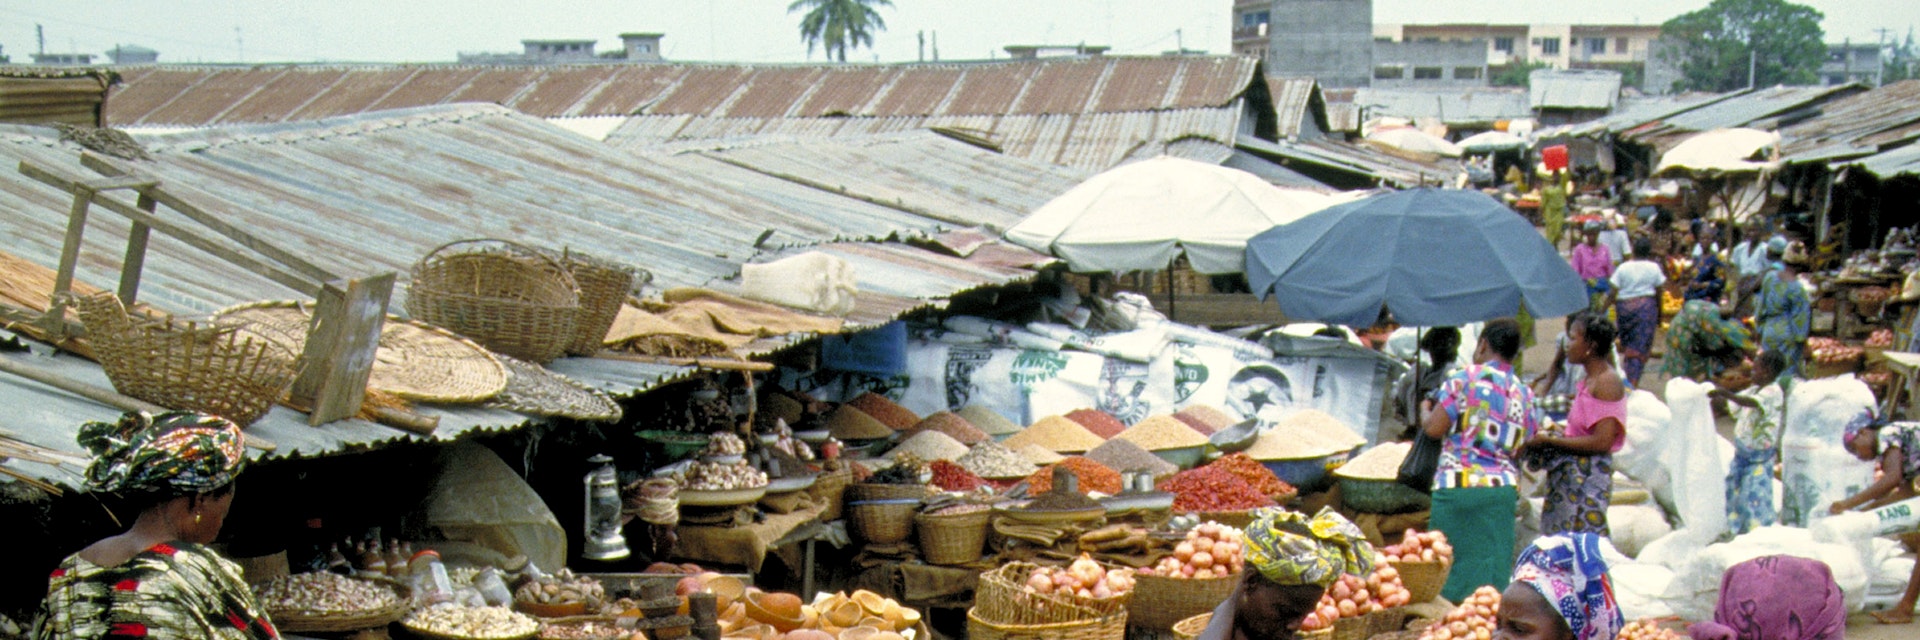 The Dantokpa Market in Cotonou, Benin, one of the largest open air markets in West Africa. (Photo by: MyLoupe/UIG via Getty Images)